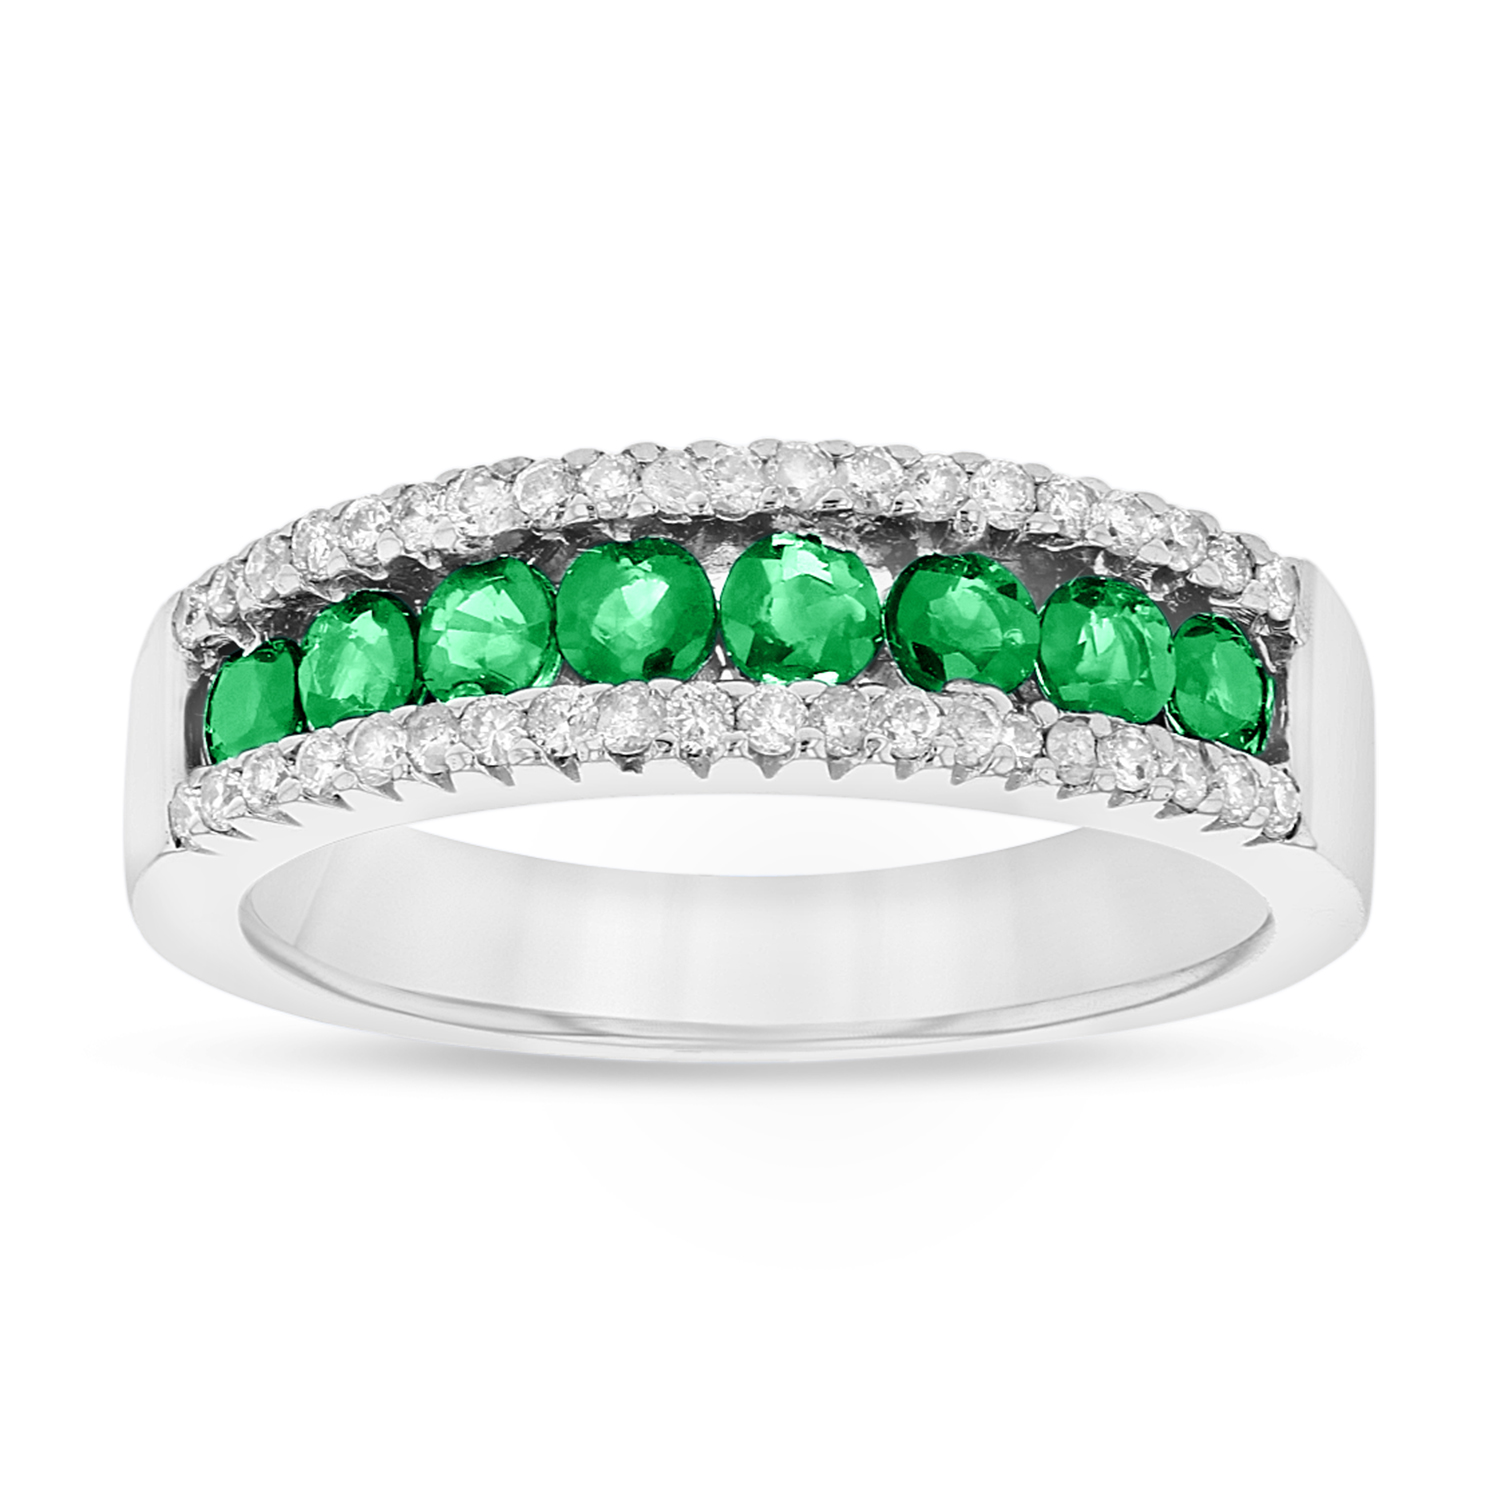 Emerald and Diamond Wedding Band in 14k White Gold